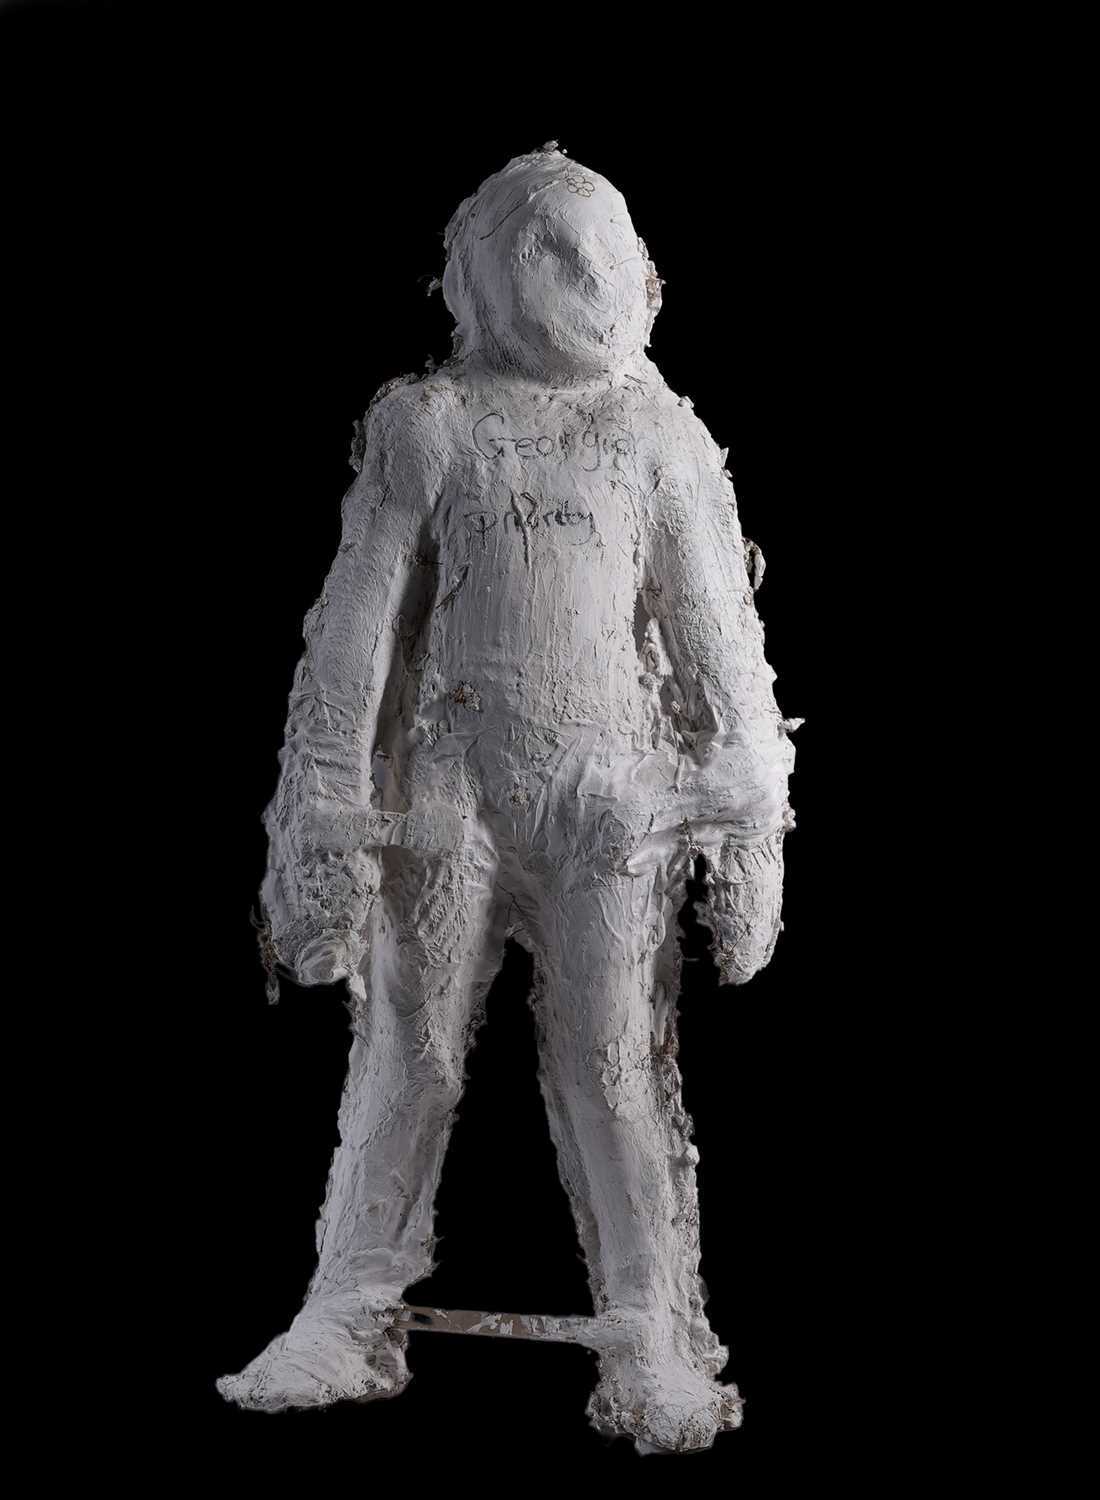 Sir Antony Mark David Gormley - A studio mould for "Domain Field" | artist's mould - Image 2 of 7